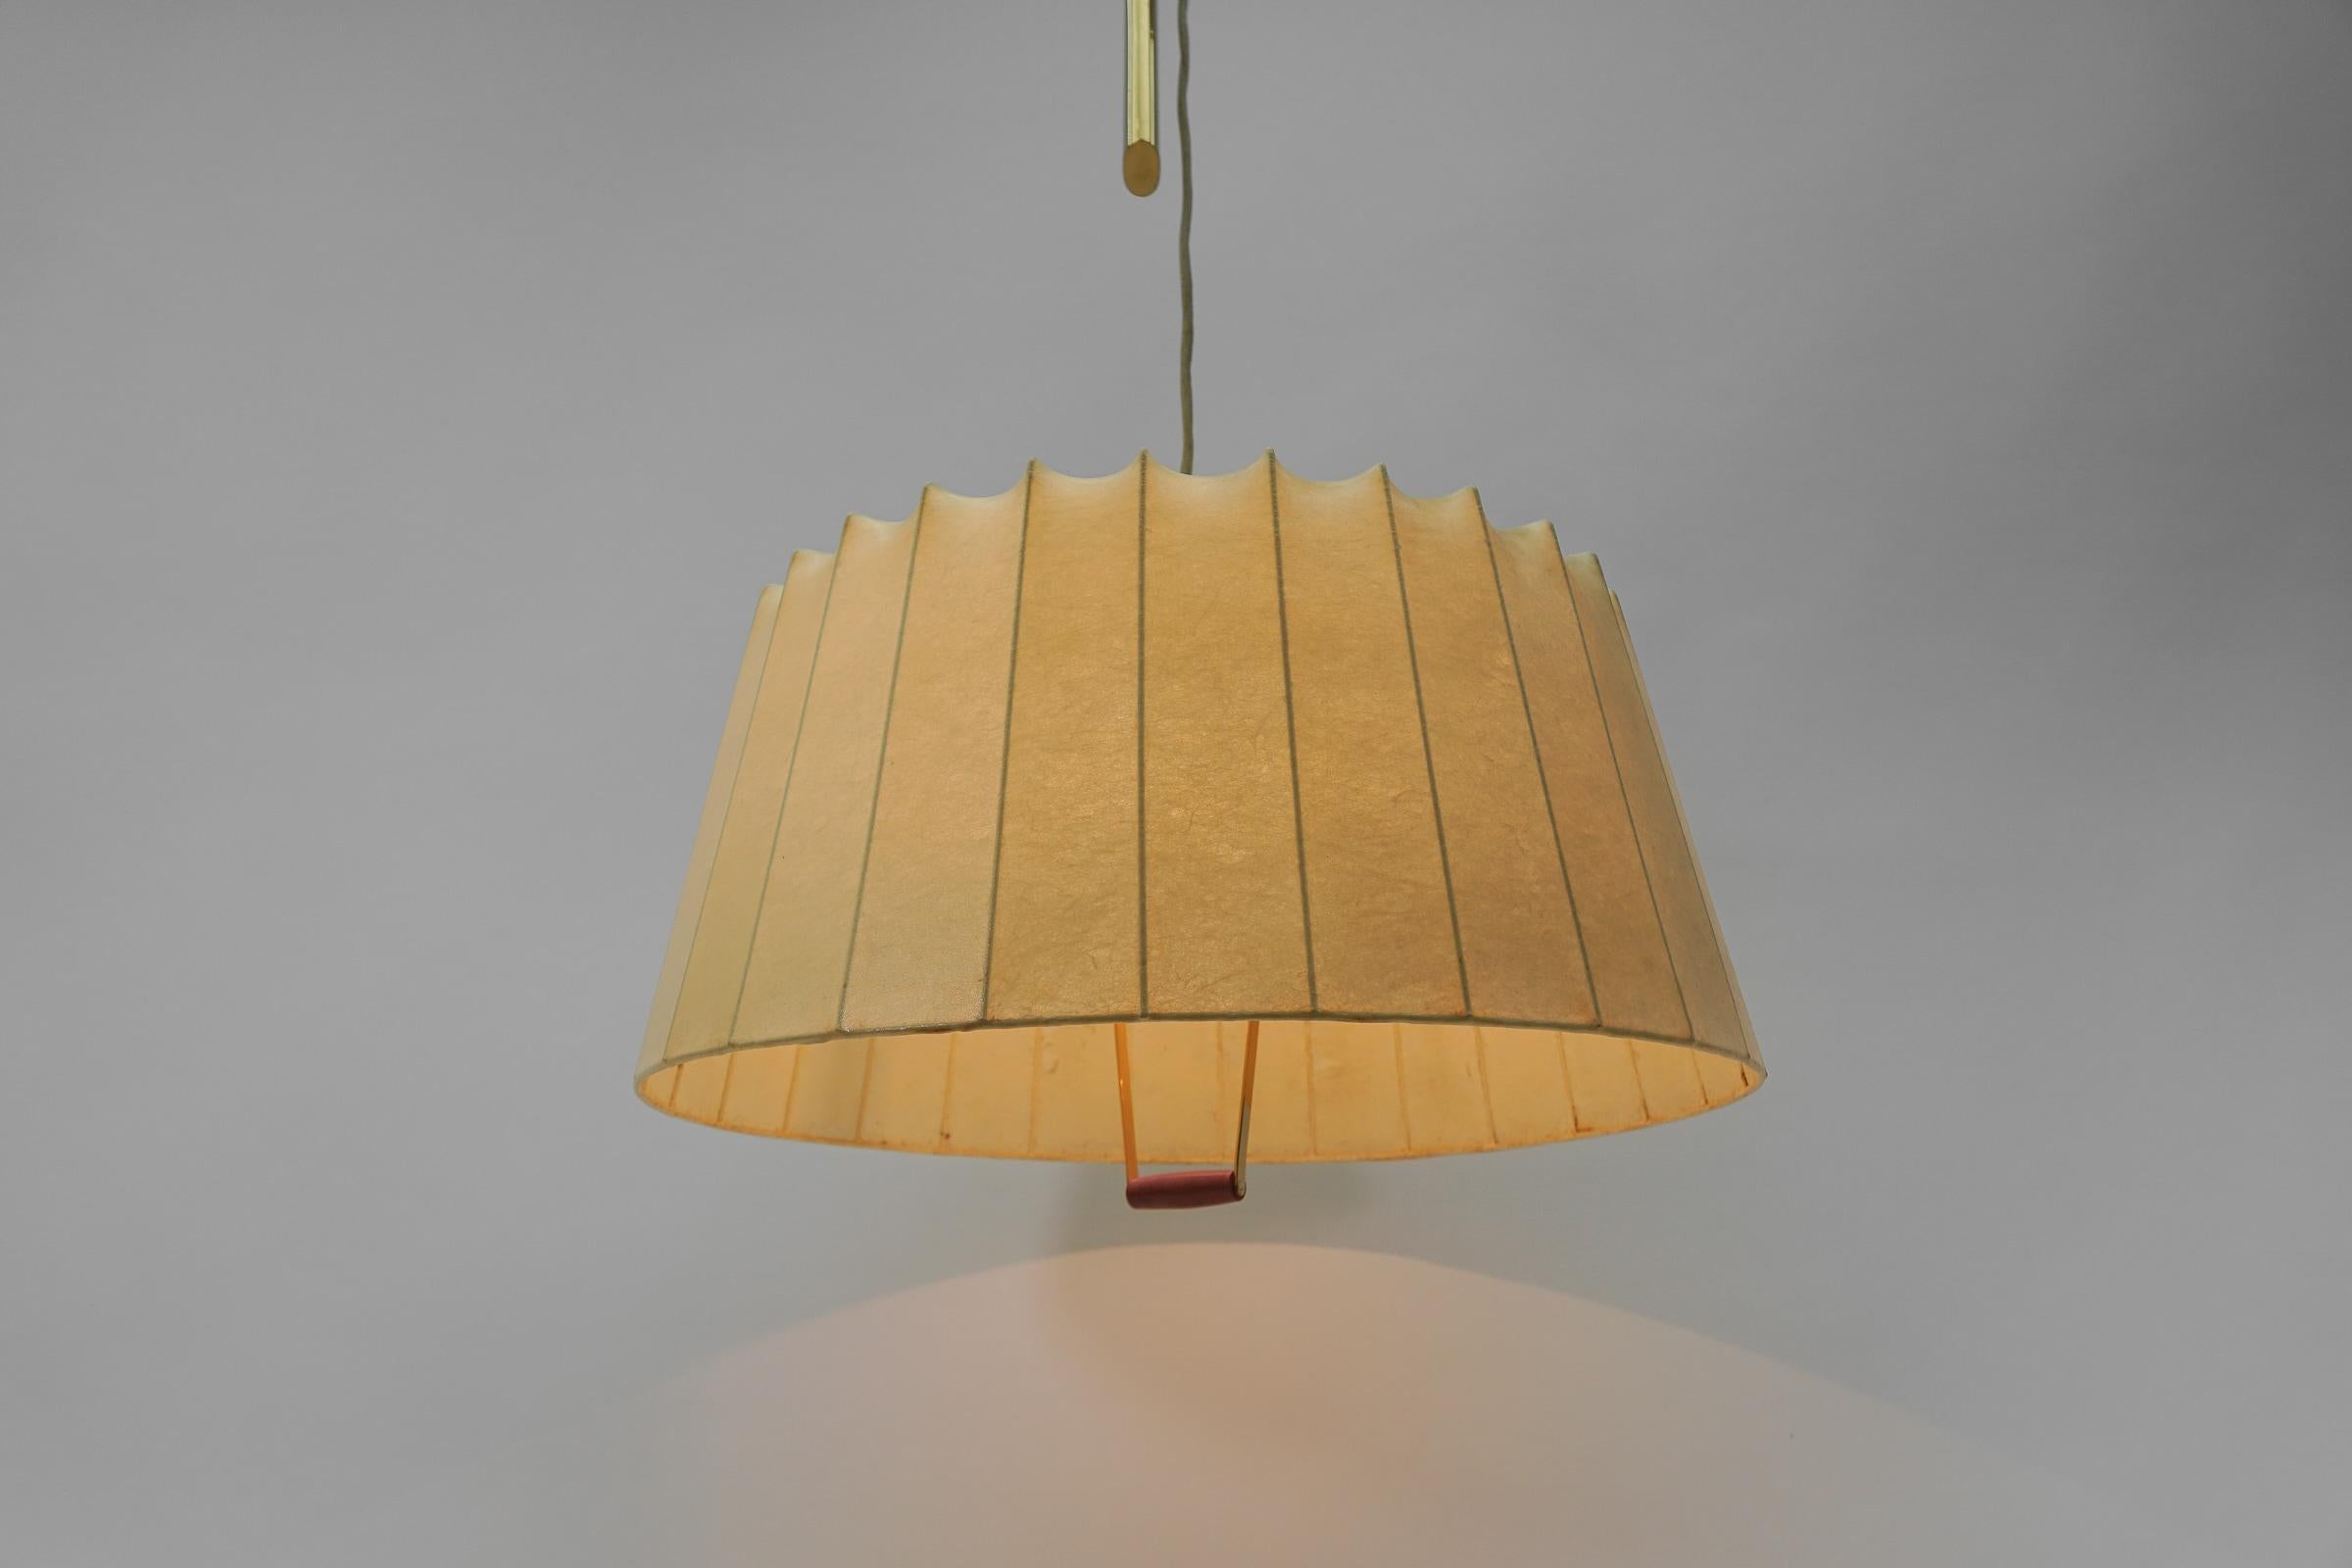 Lovely Cocoon Counterweight Hanging Lamp by Münchener Werkstätten, 1950s Germany For Sale 5